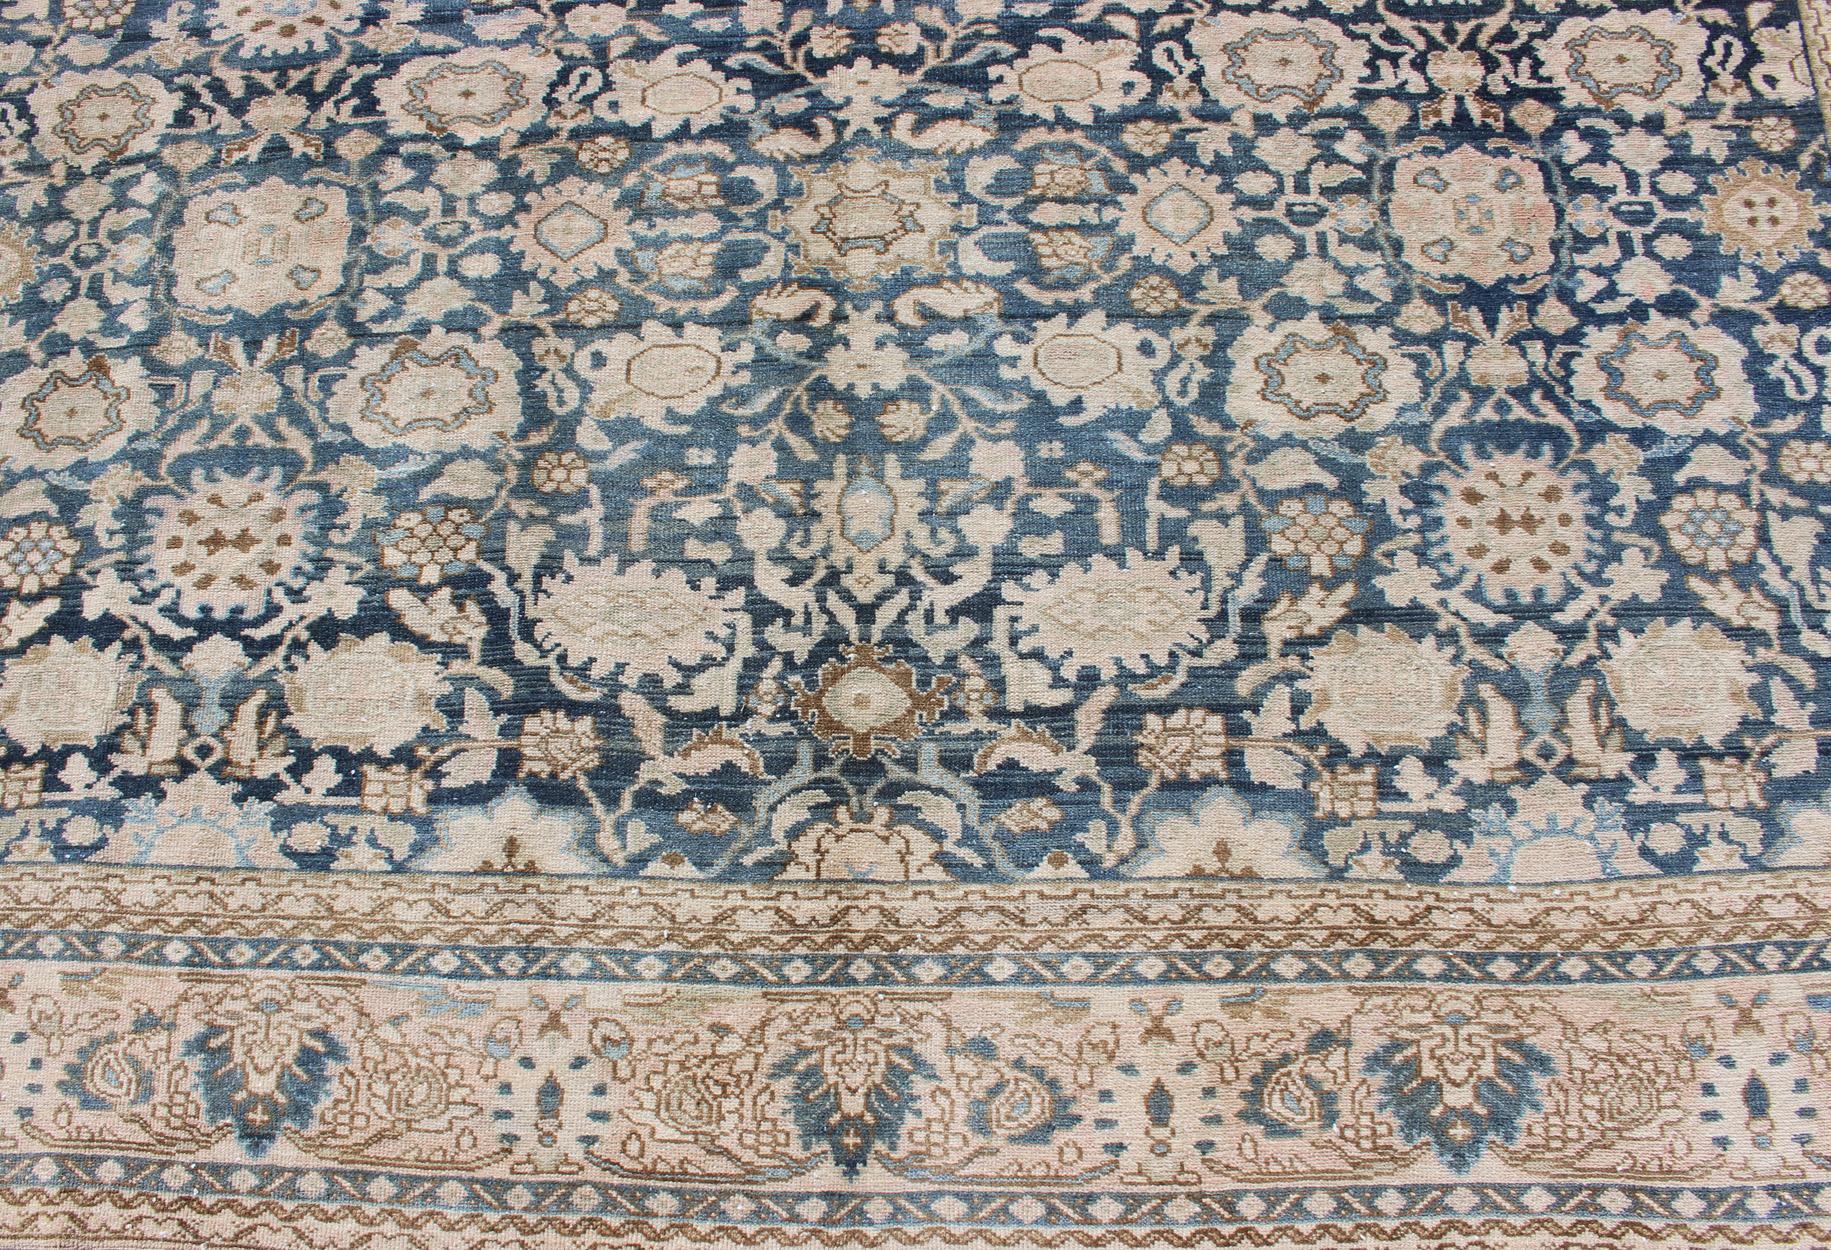 All-Over Blue Floral Persian Hamadan Rug in Navy Blue and Earthy Tones For Sale 6